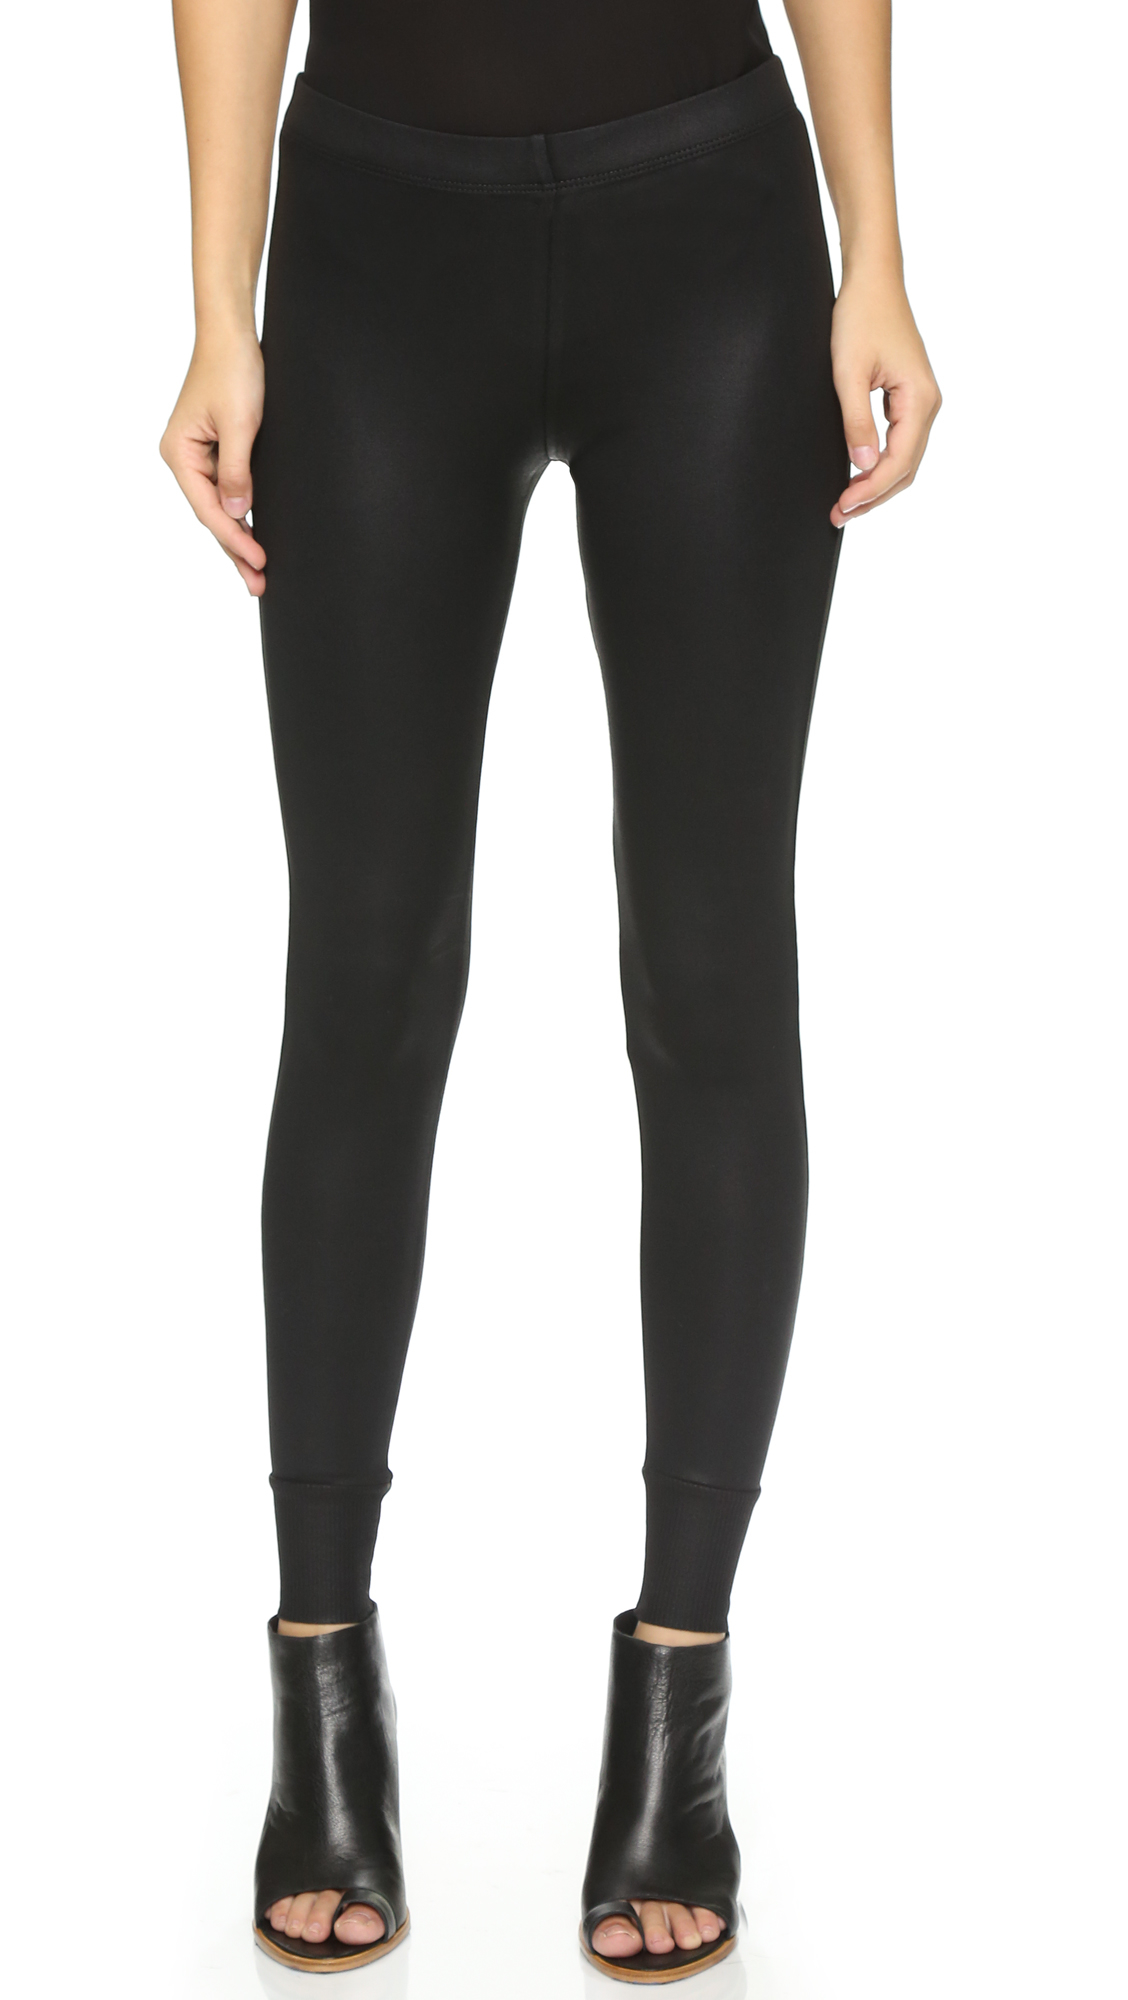 Lyst - David lerner Leatherette Leggings With Cuffs in Black